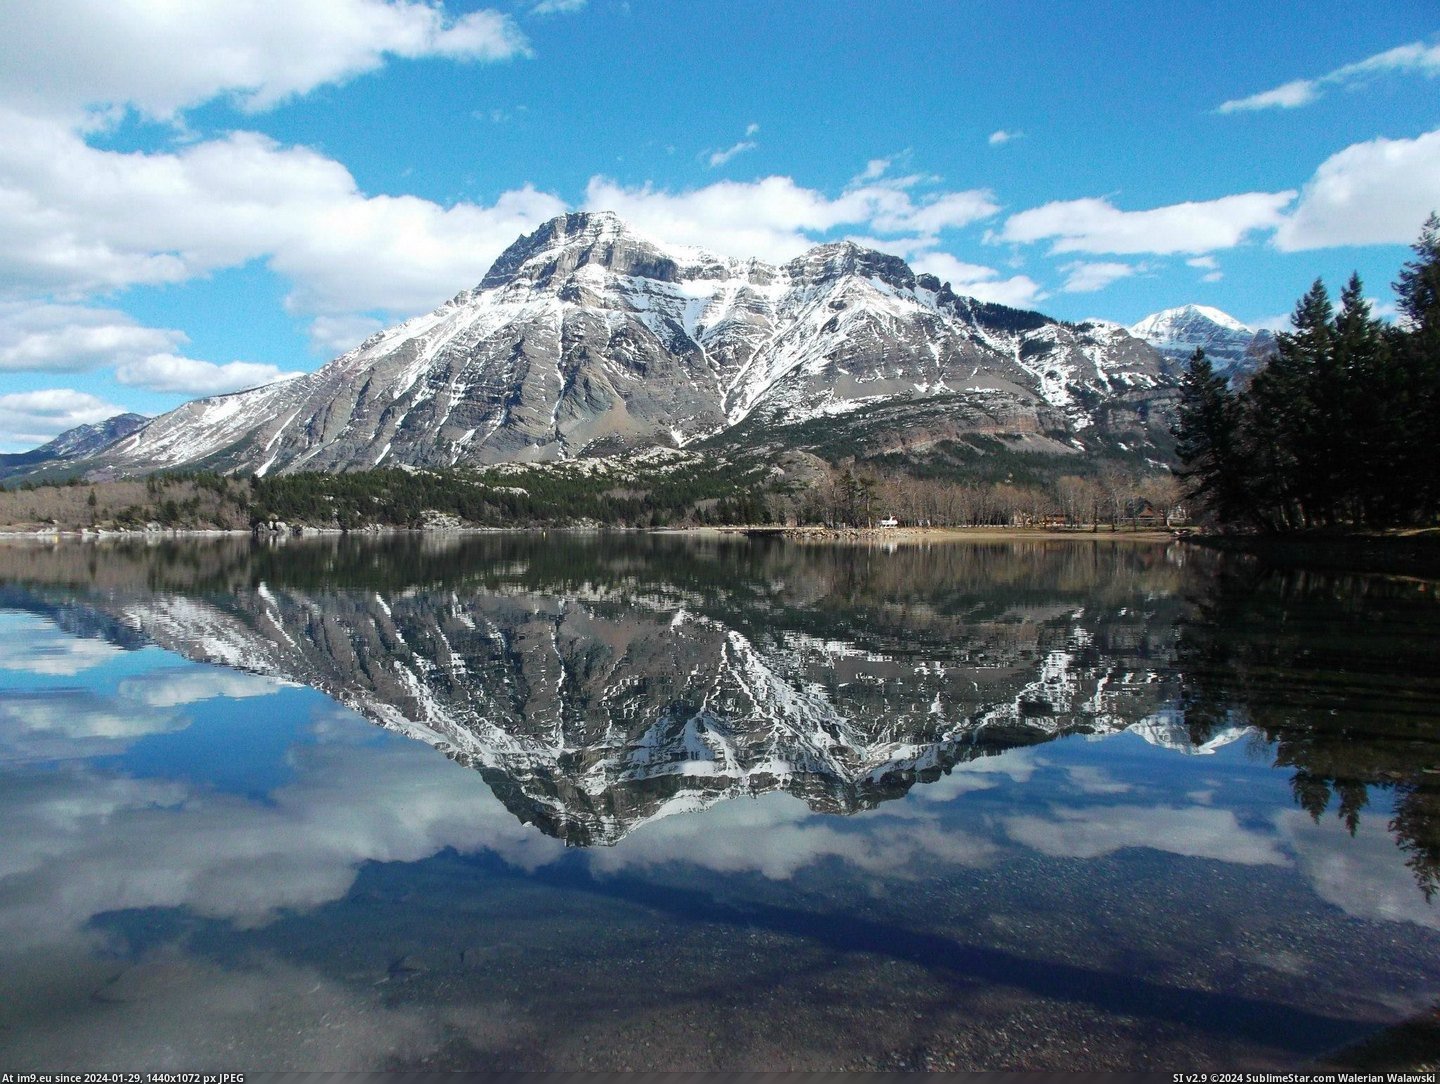 #Park #National #Alberta #Vimy #Waterton #2048x1536 #Lakes #Reflection [Earthporn] Reflection of Mt. Vimy in Waterton Lakes National Park, Alberta [2048x1536] Pic. (Image of album My r/EARTHPORN favs))